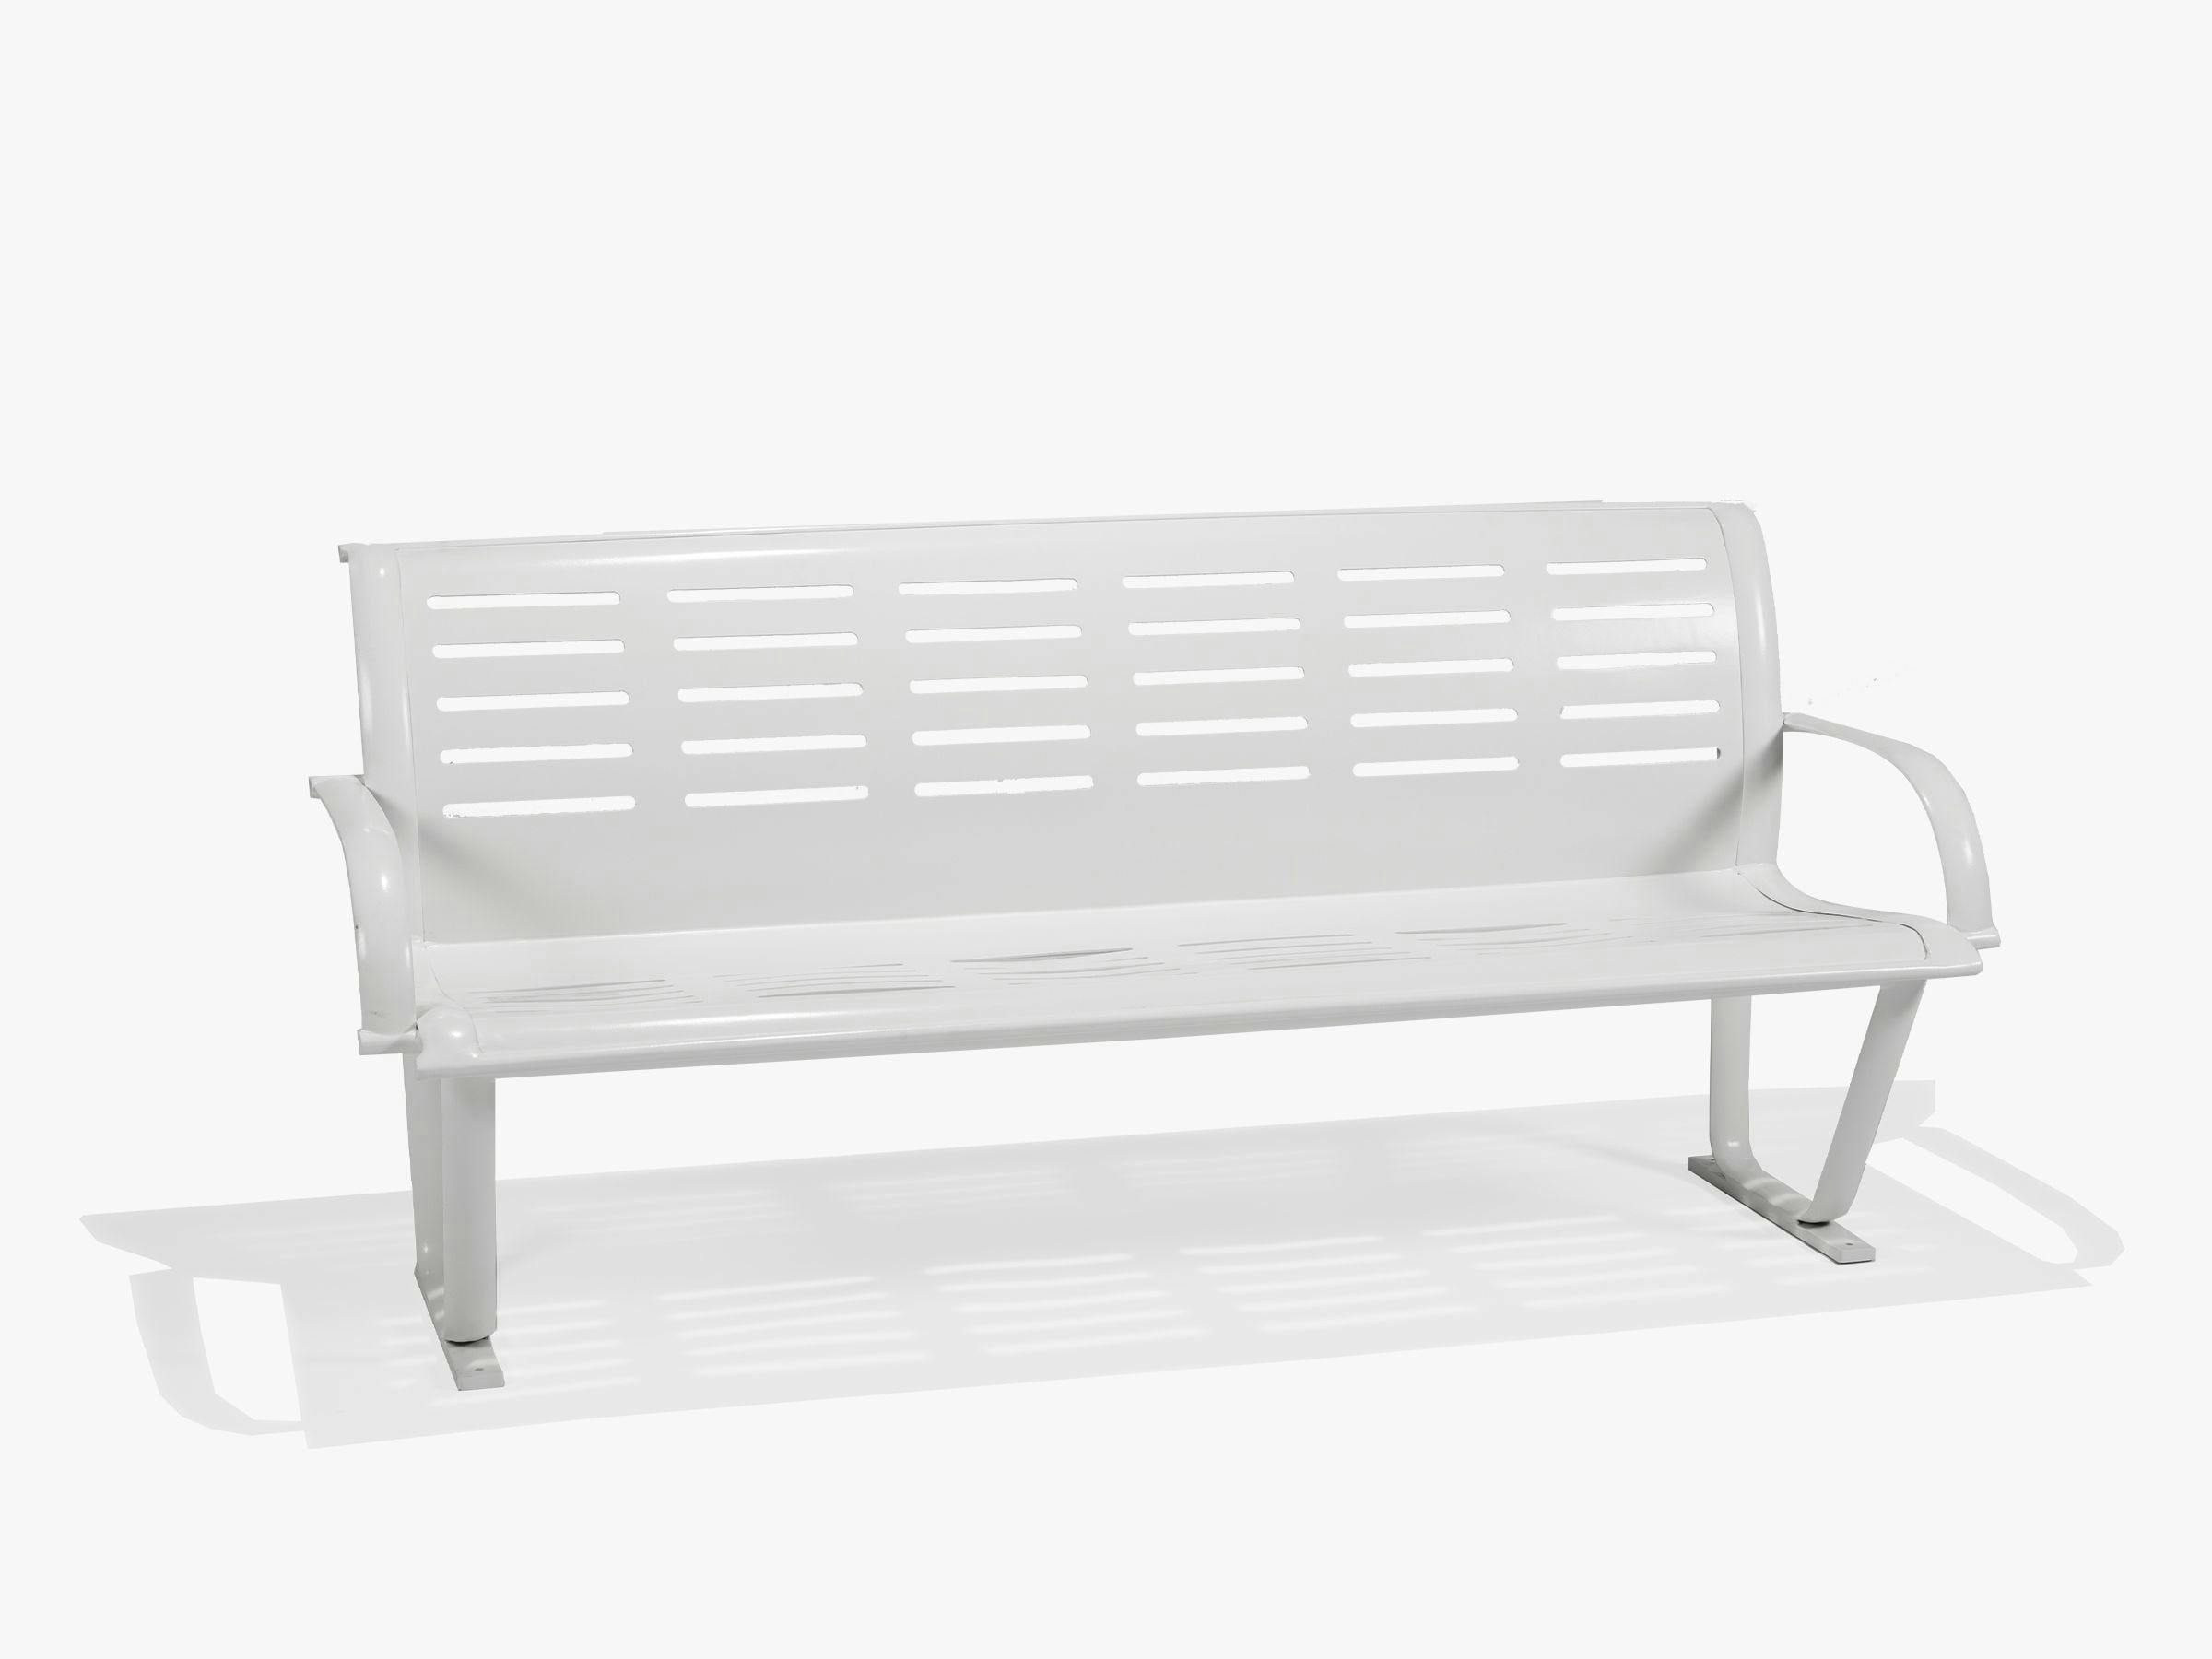 6' Bench with Back and Arms